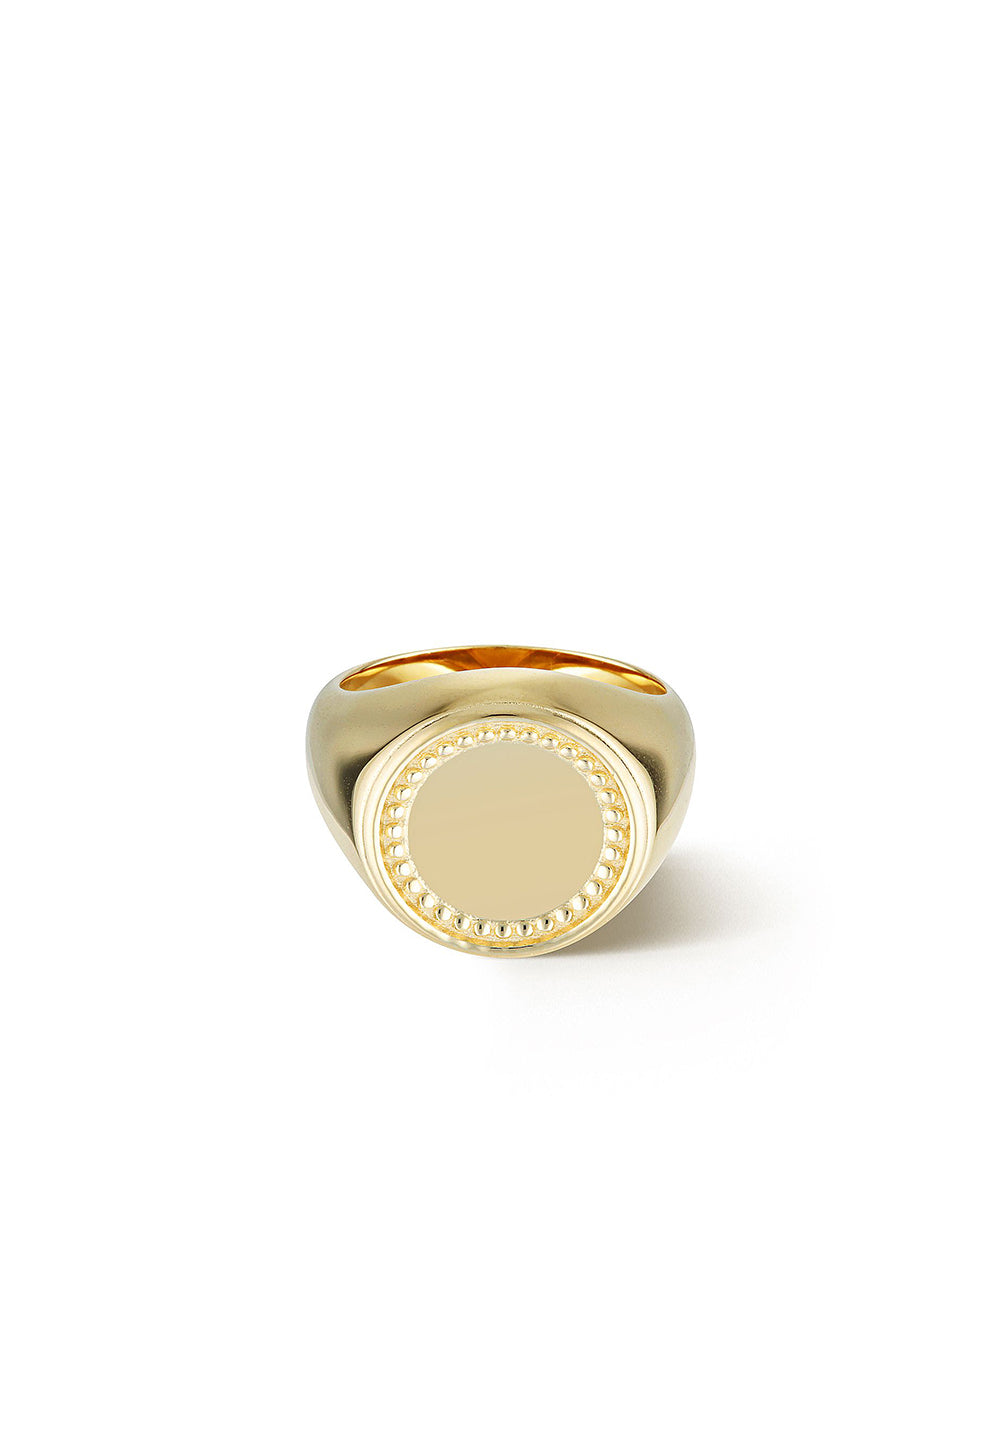 The Sienna Signet Ring sold by Angel Divine